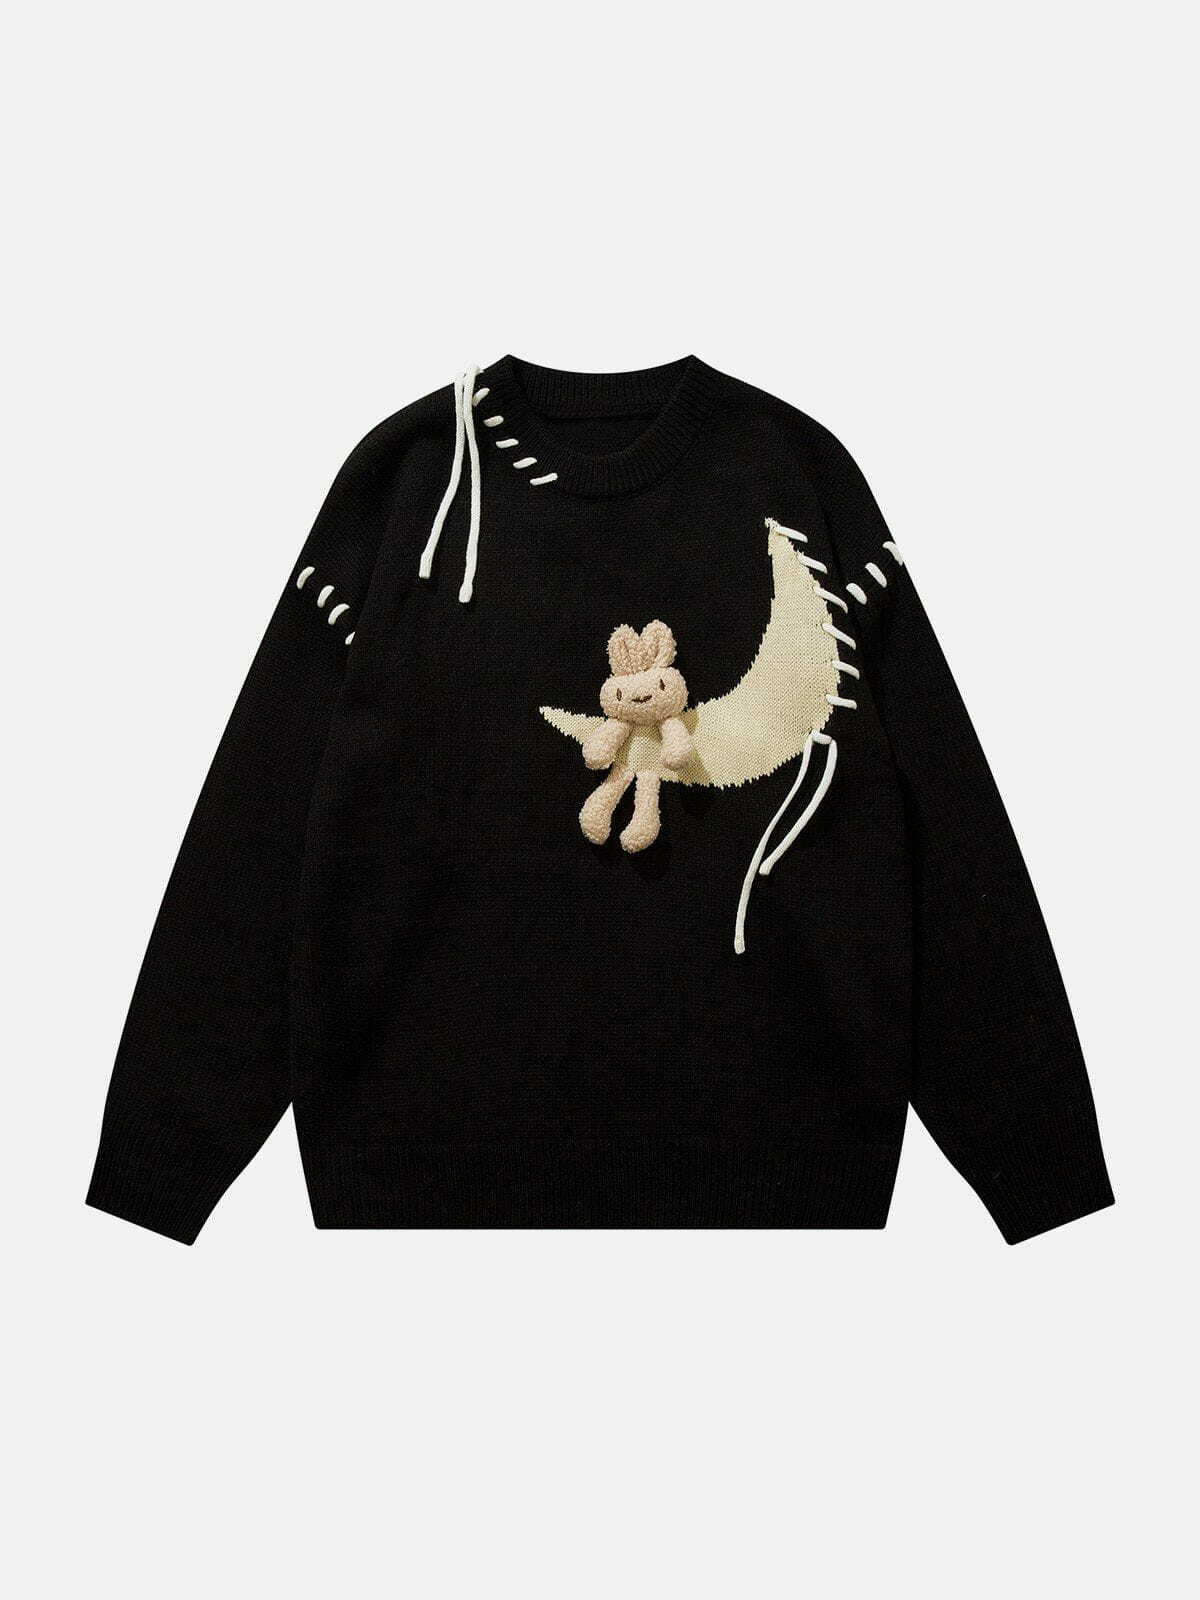 adorable rabbit straps sweater quirky & youthful fashion 5229